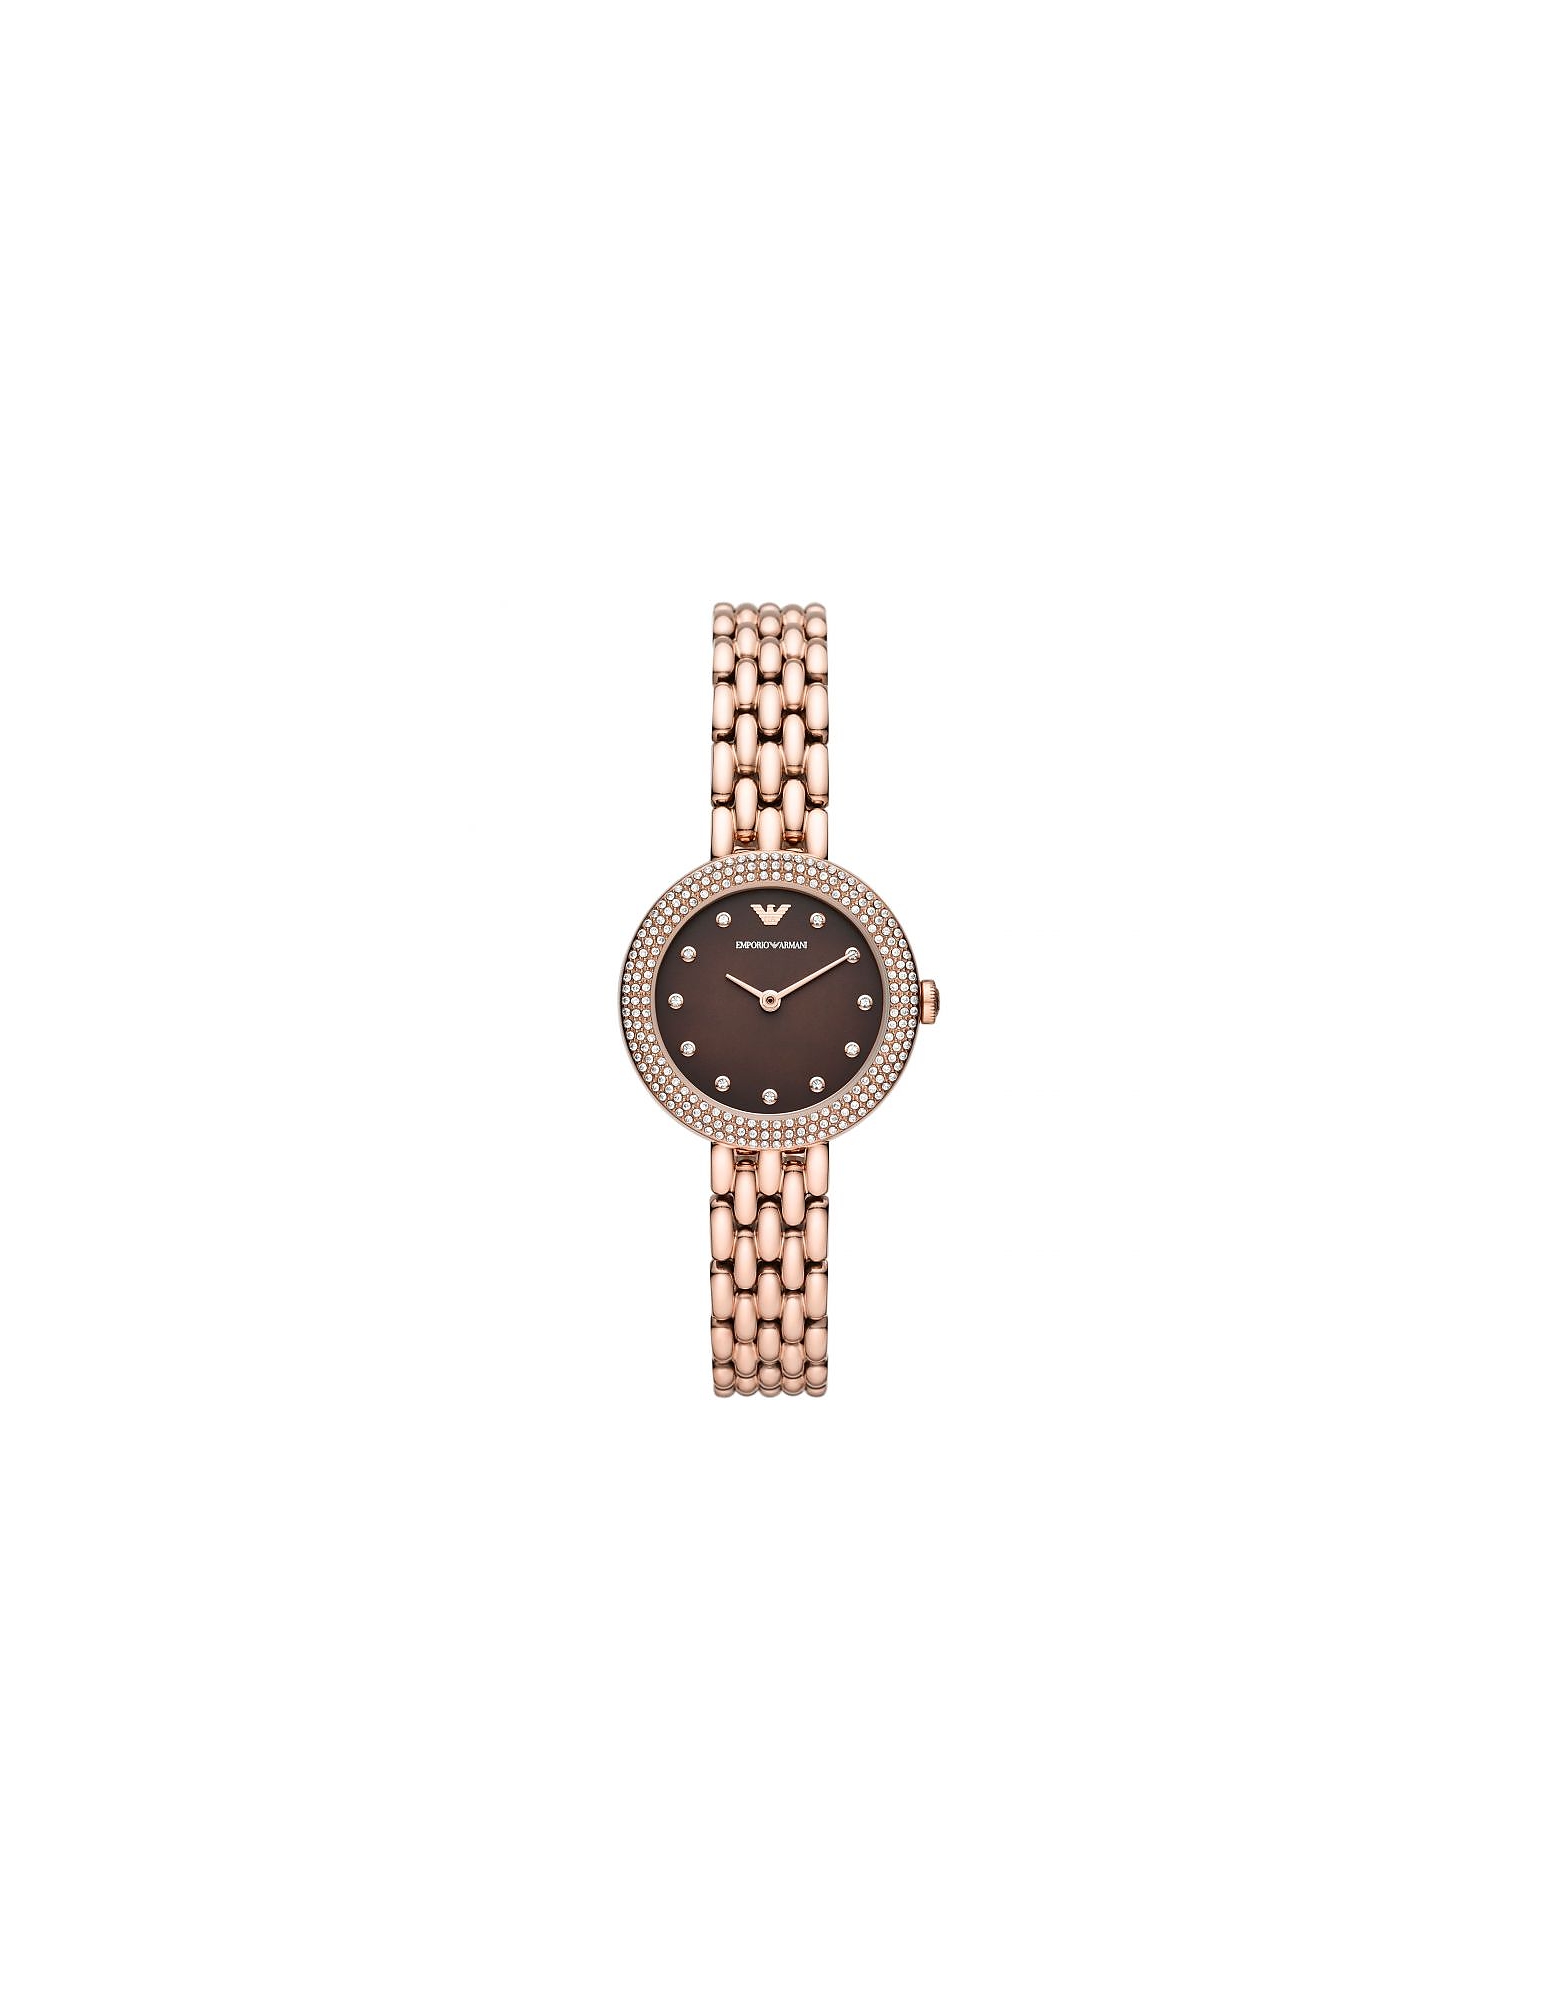 Emporio Armani Woman Wrist Watch Rose Gold Size - Stainless Steel